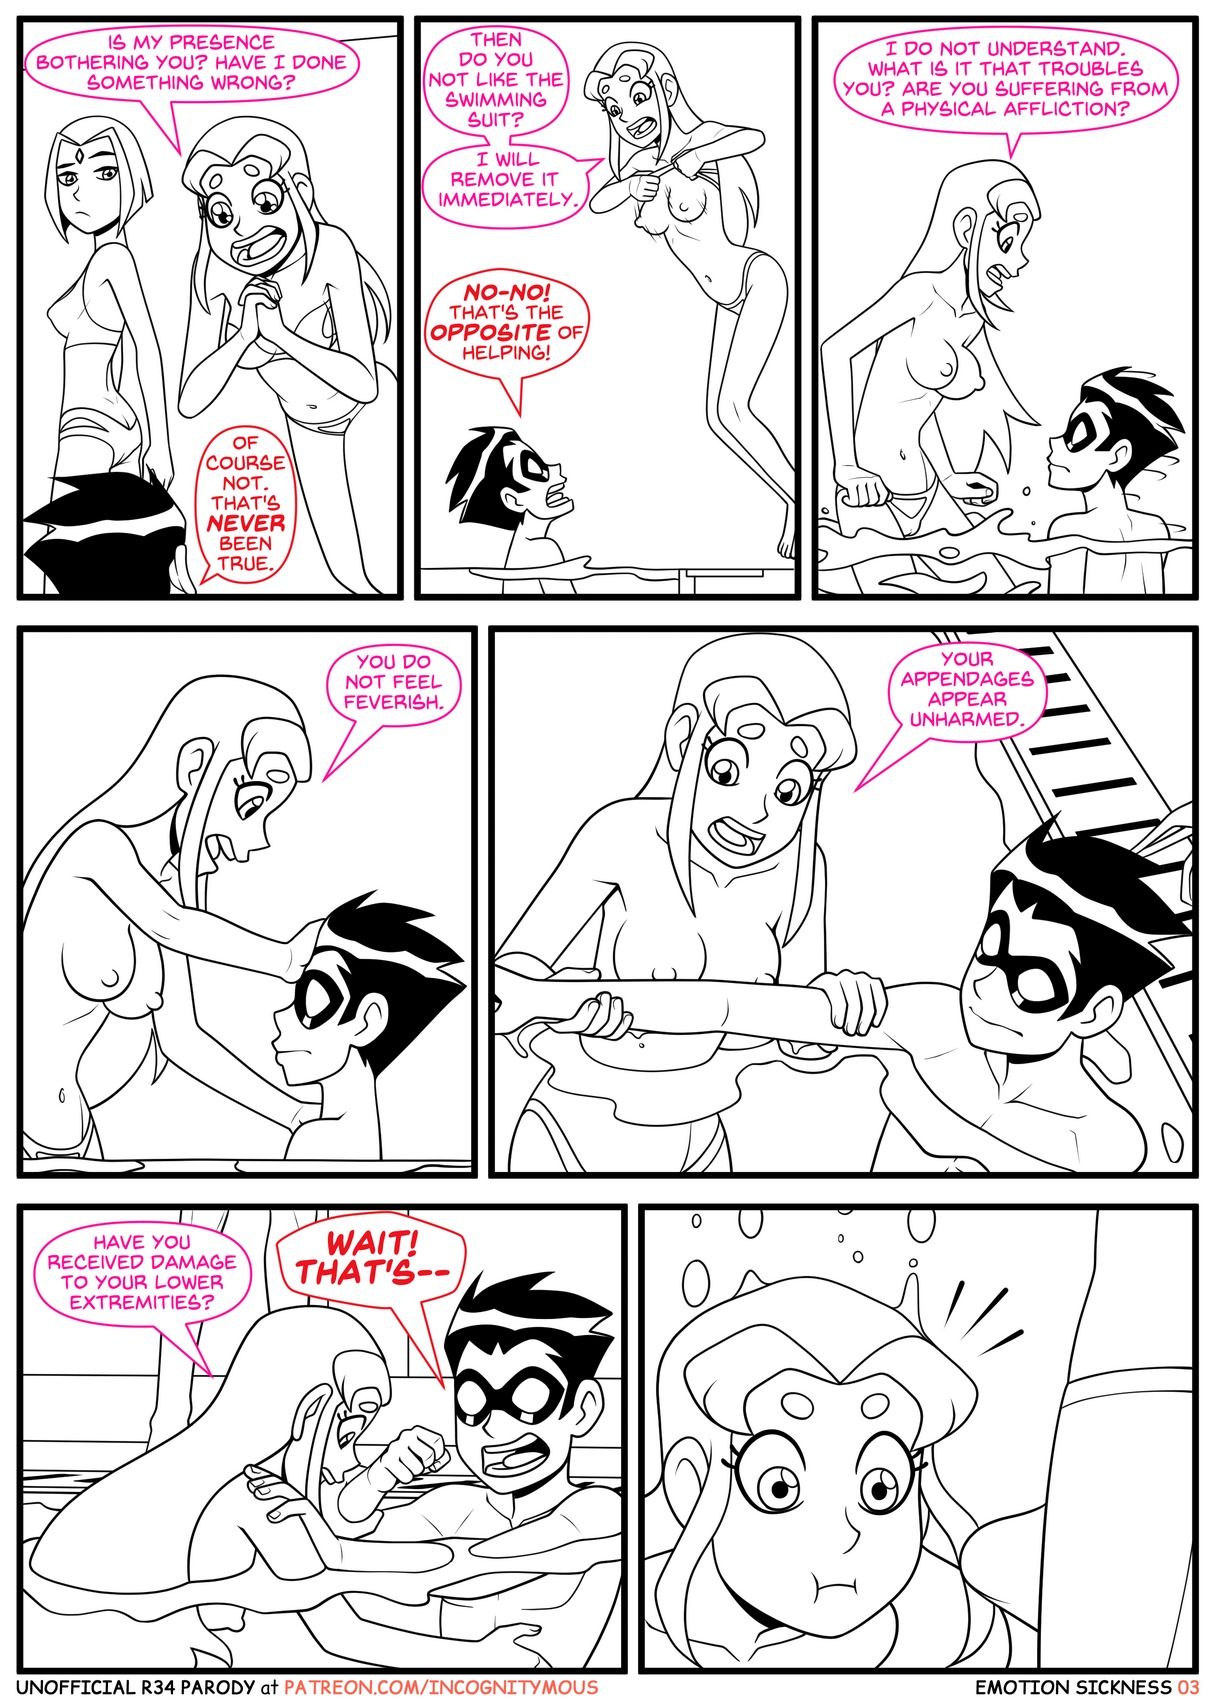 Teen Titans - Emotion Sickness (Incognitymous) page 11